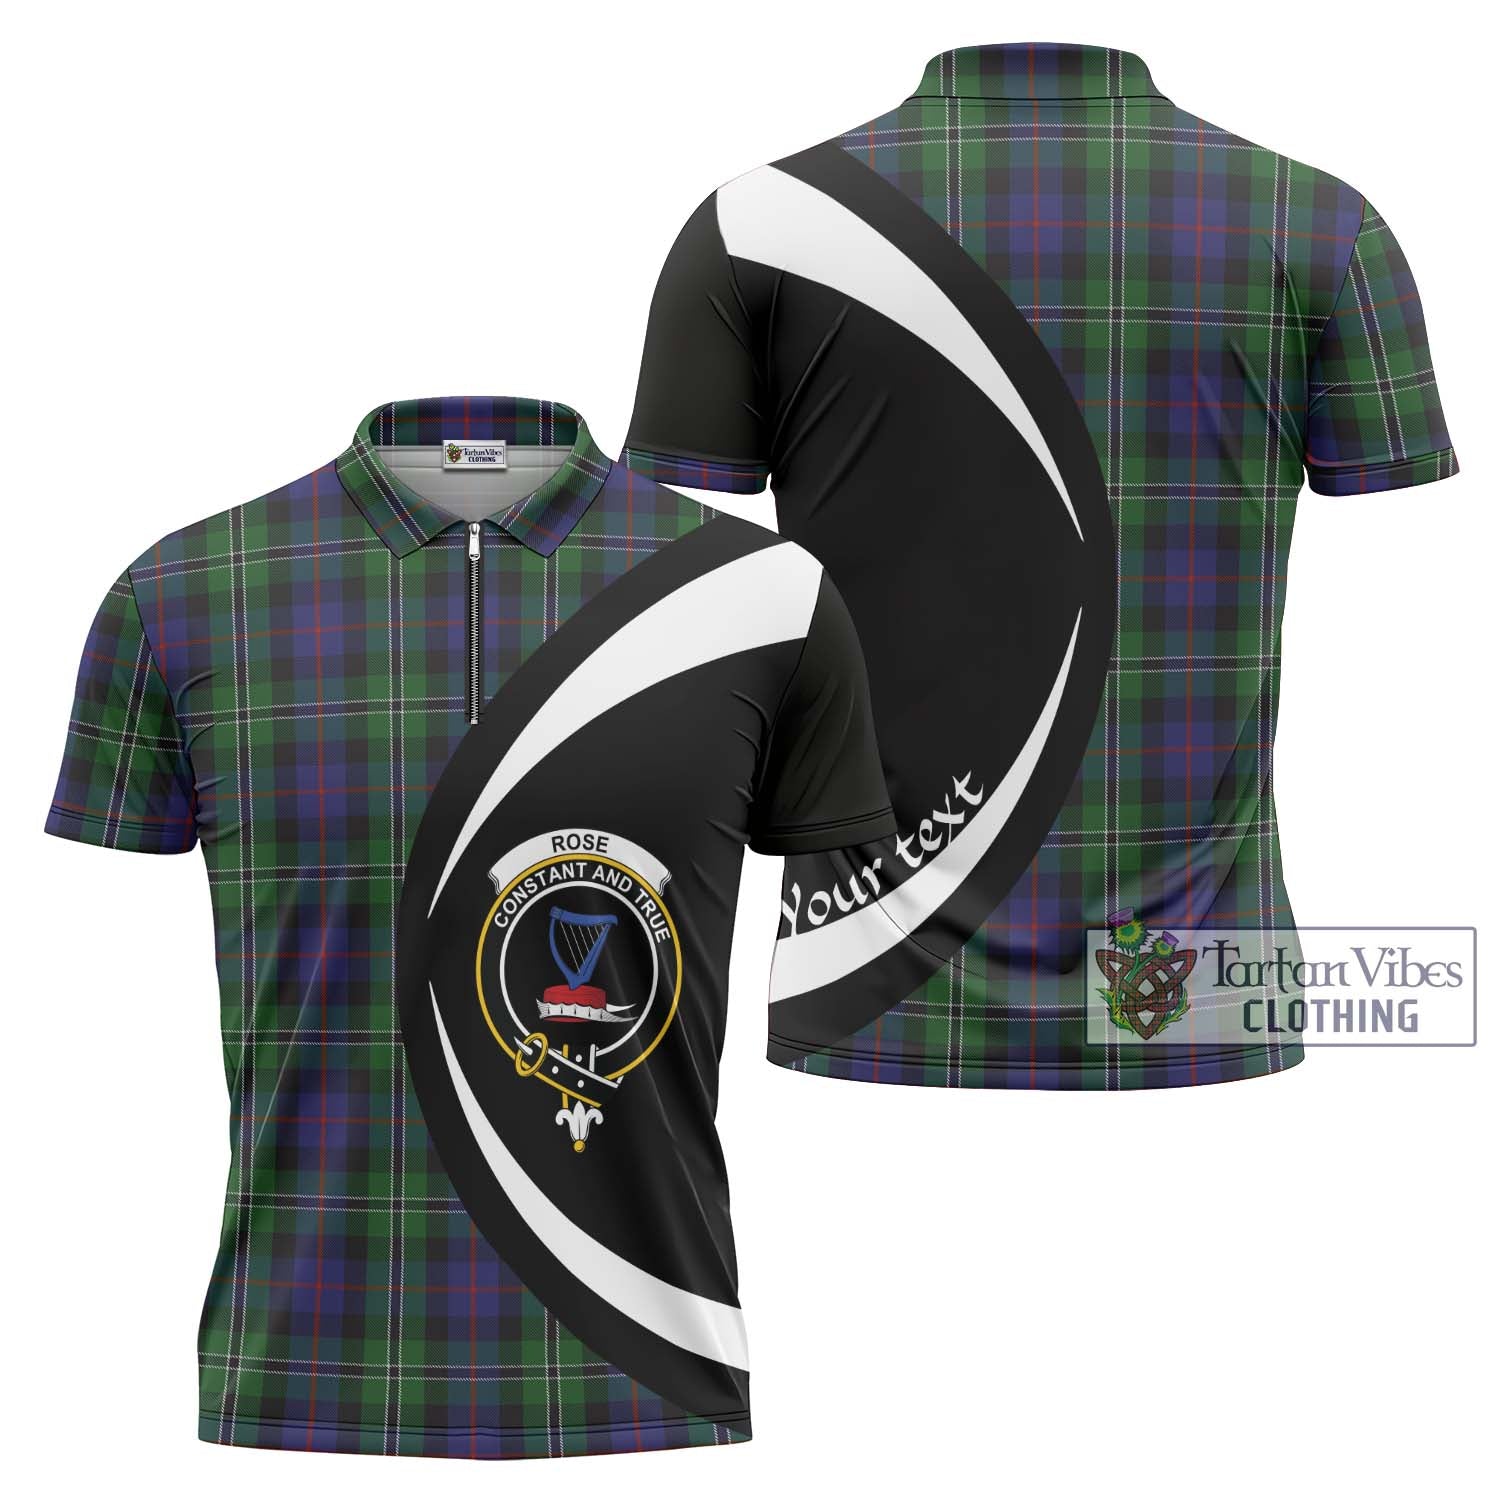 Tartan Vibes Clothing Rose Hunting Tartan Zipper Polo Shirt with Family Crest Circle Style